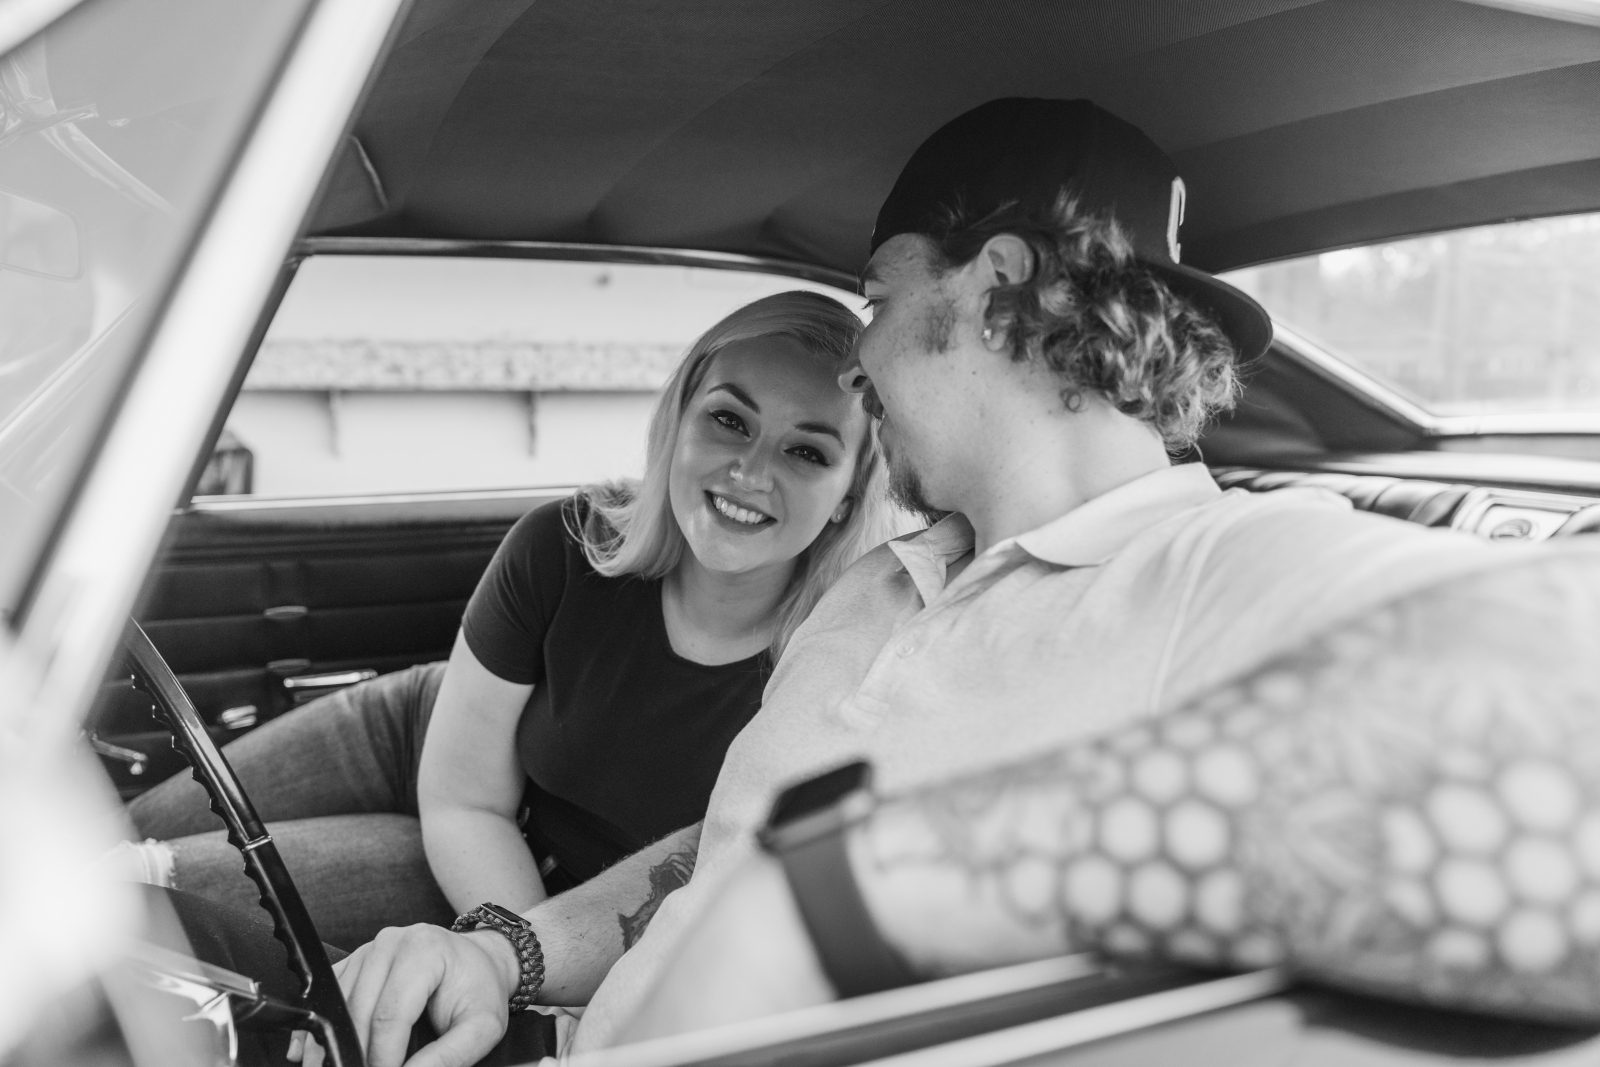 Man and woman fiancee engagement photo, couple portrait, vintage car, black and white, fall outdoor engagement photo shoot at Dairy King